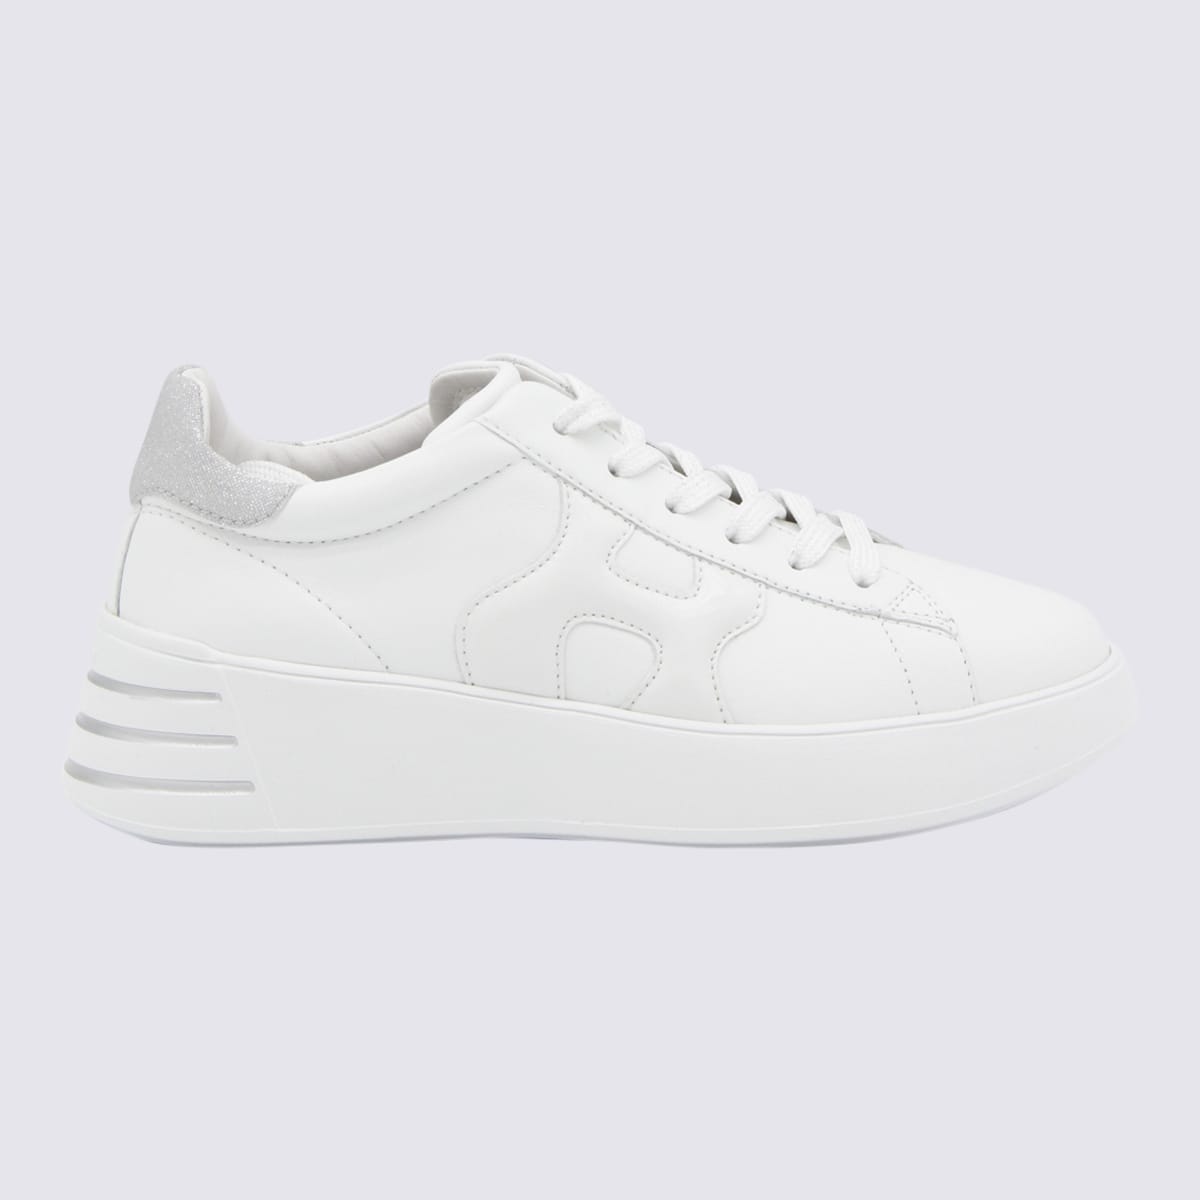 Hogan White And Grey Leather Rebel Sneakers